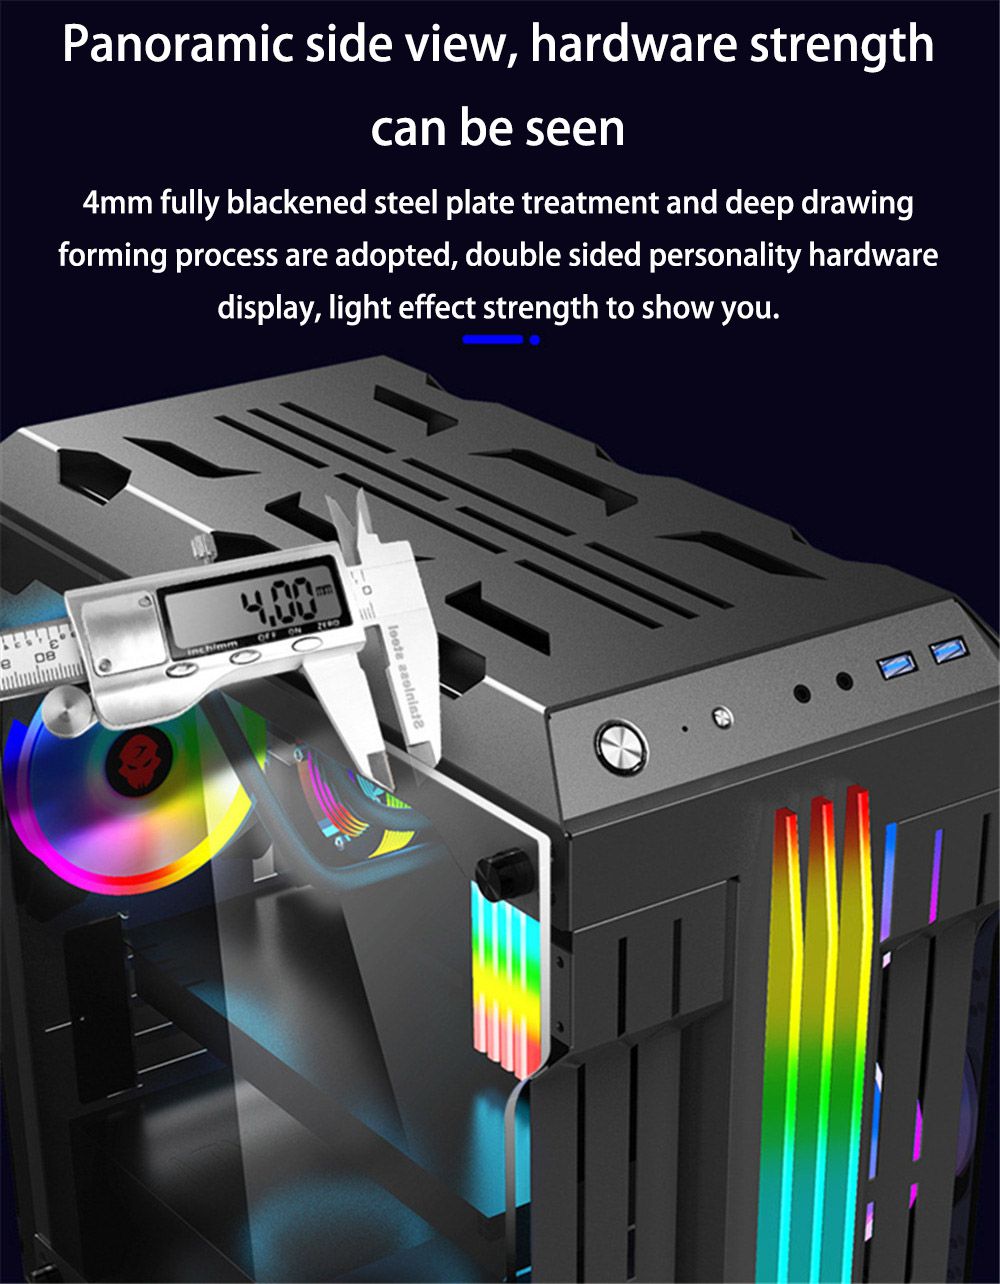 RGB-Light-Bar-Computer-Case-Tempered-Glass-Panels-ATX-Gaming-Water-Cooling-PC-Case-E-Sports-Online-C-1722840